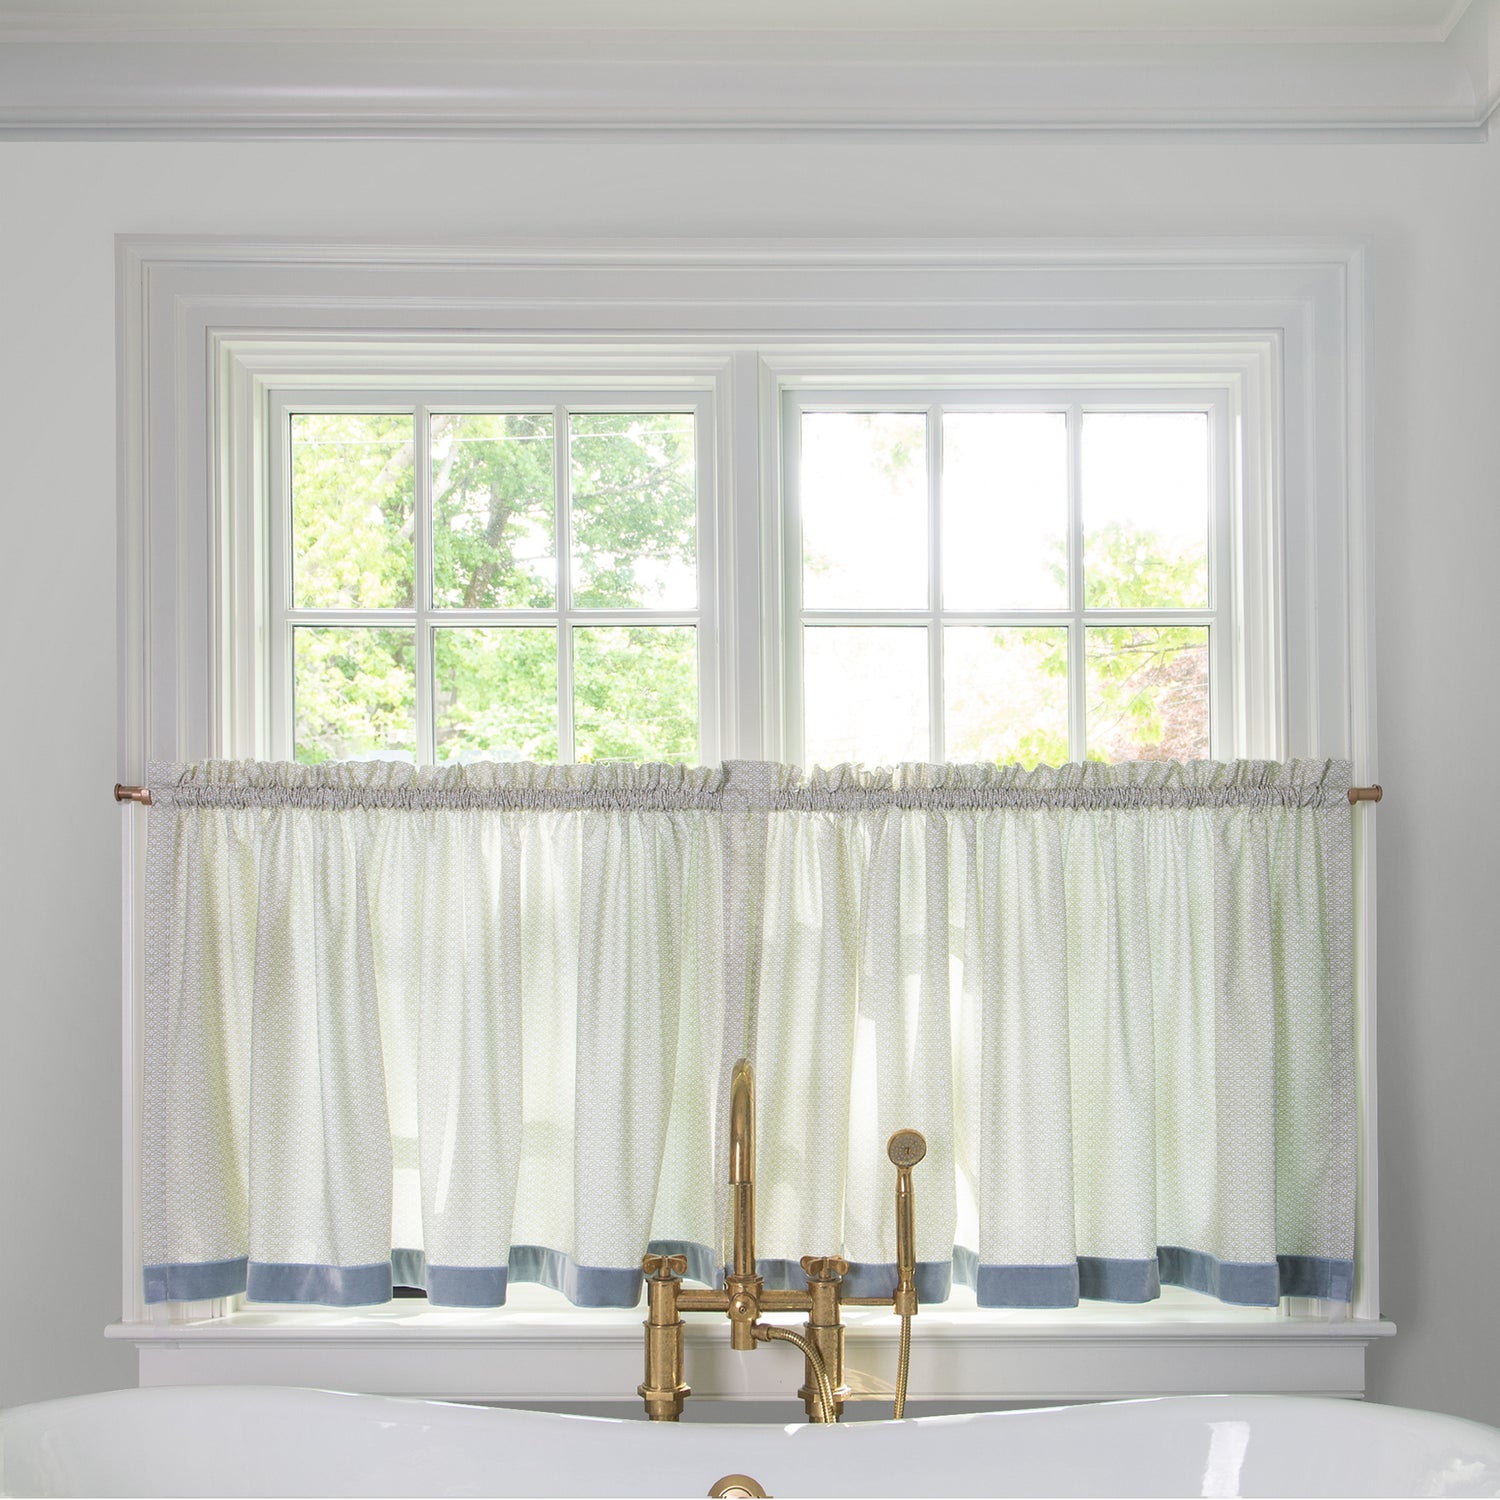 Moss Green Geometric Printed curtain on a metal rod in front of an illuminated window in a bathroom